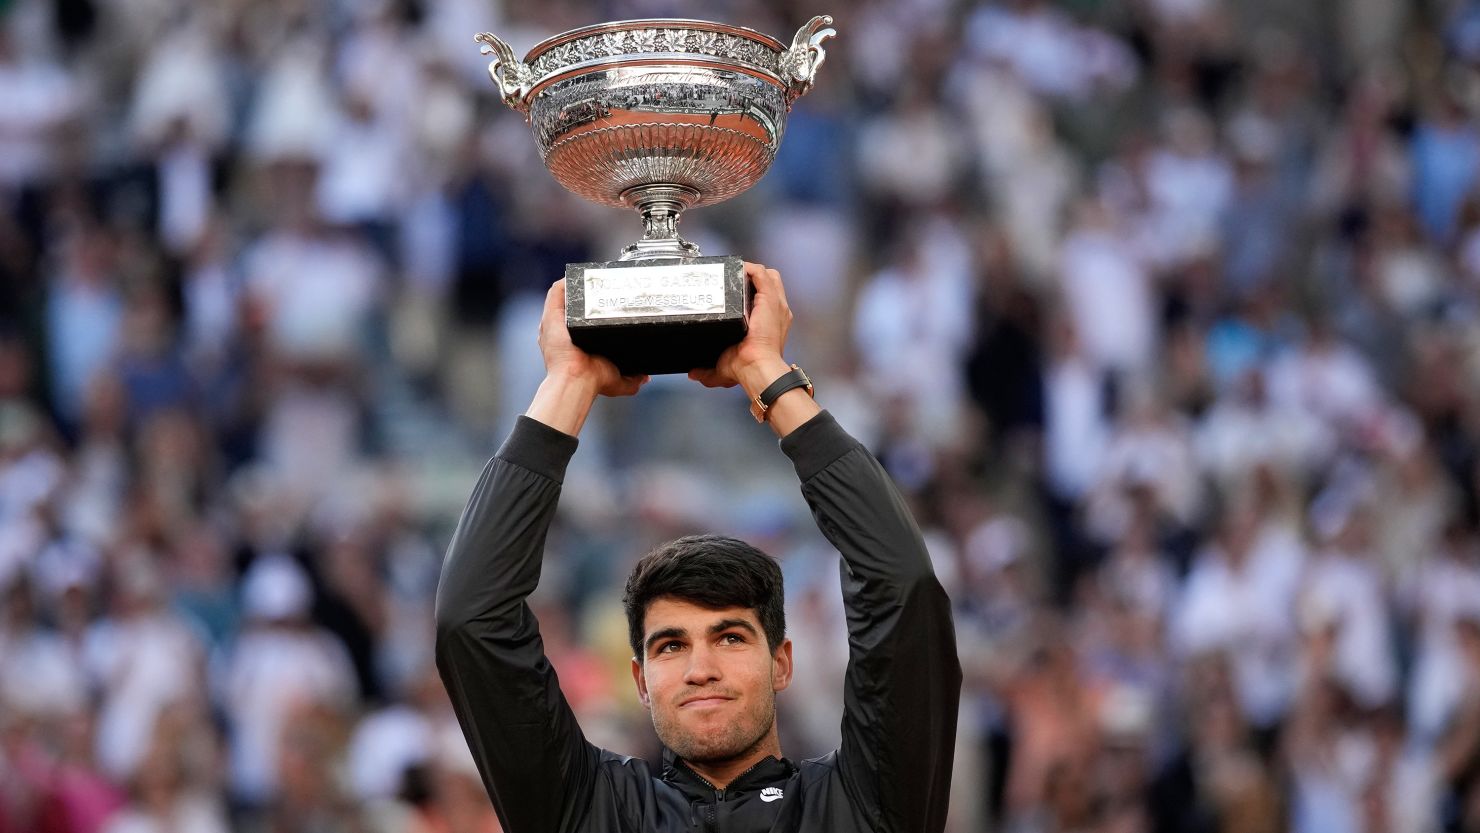 Carlos Alcaraz wins third grand slam title with five-set victory at the French  Open over Alexander Zverev | CNN